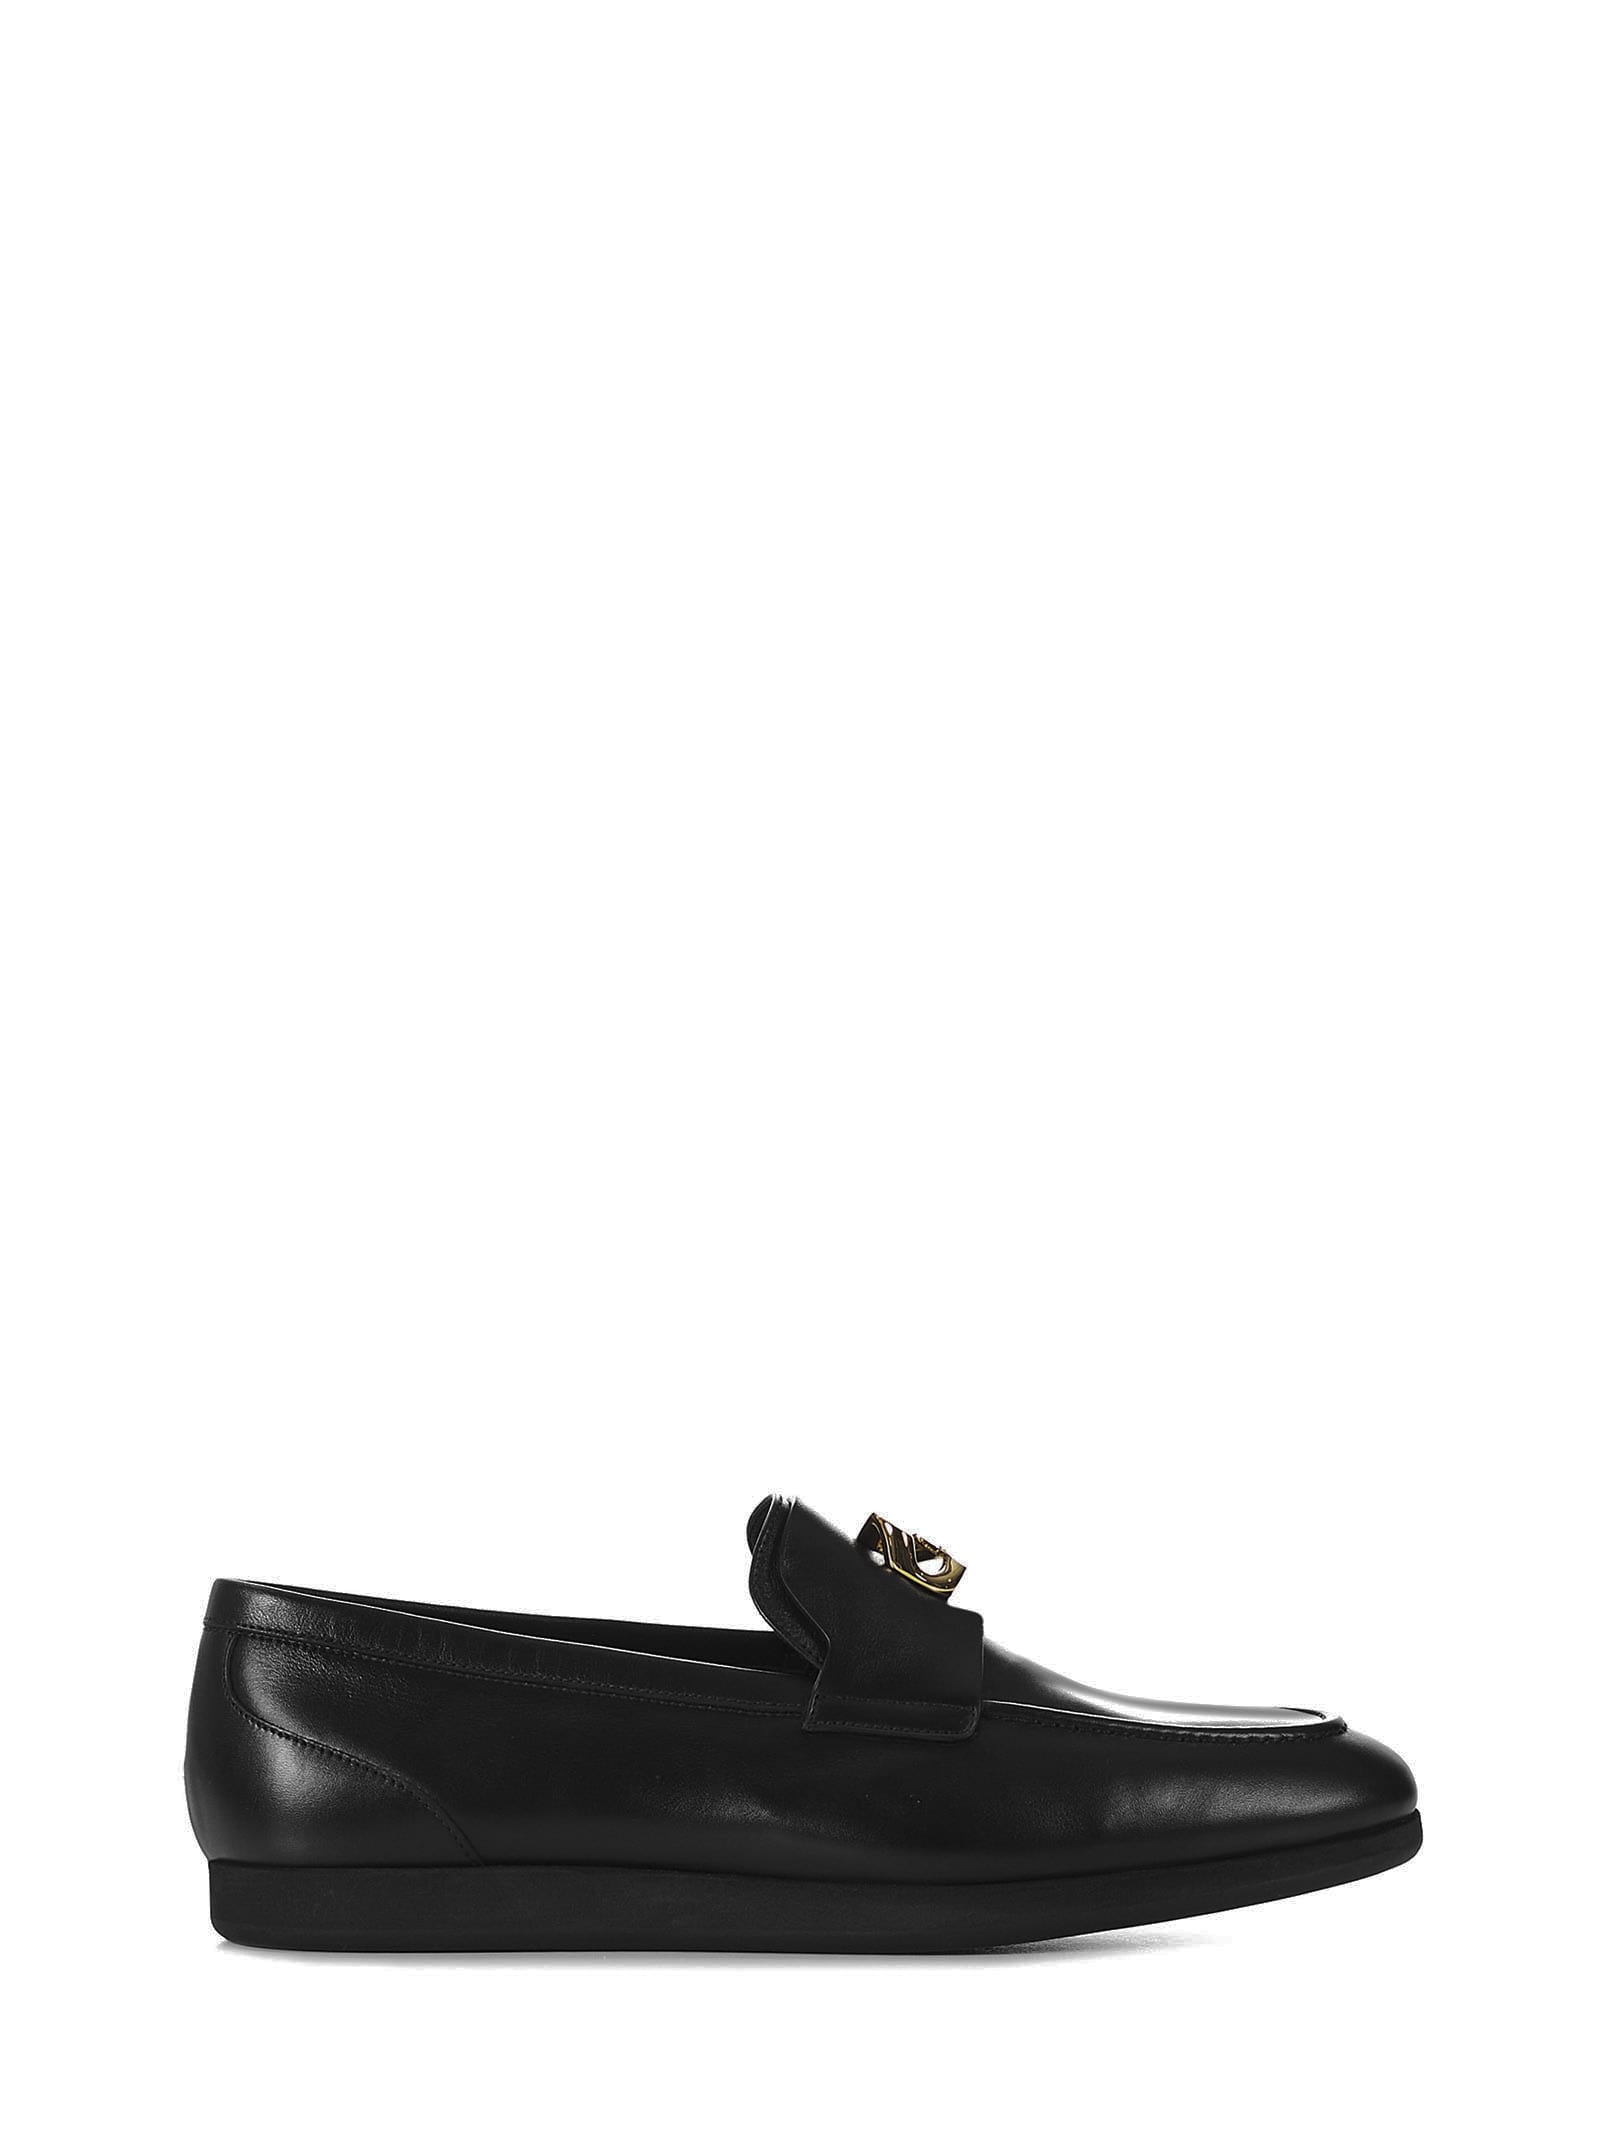 Givenchy G-chain Loafers